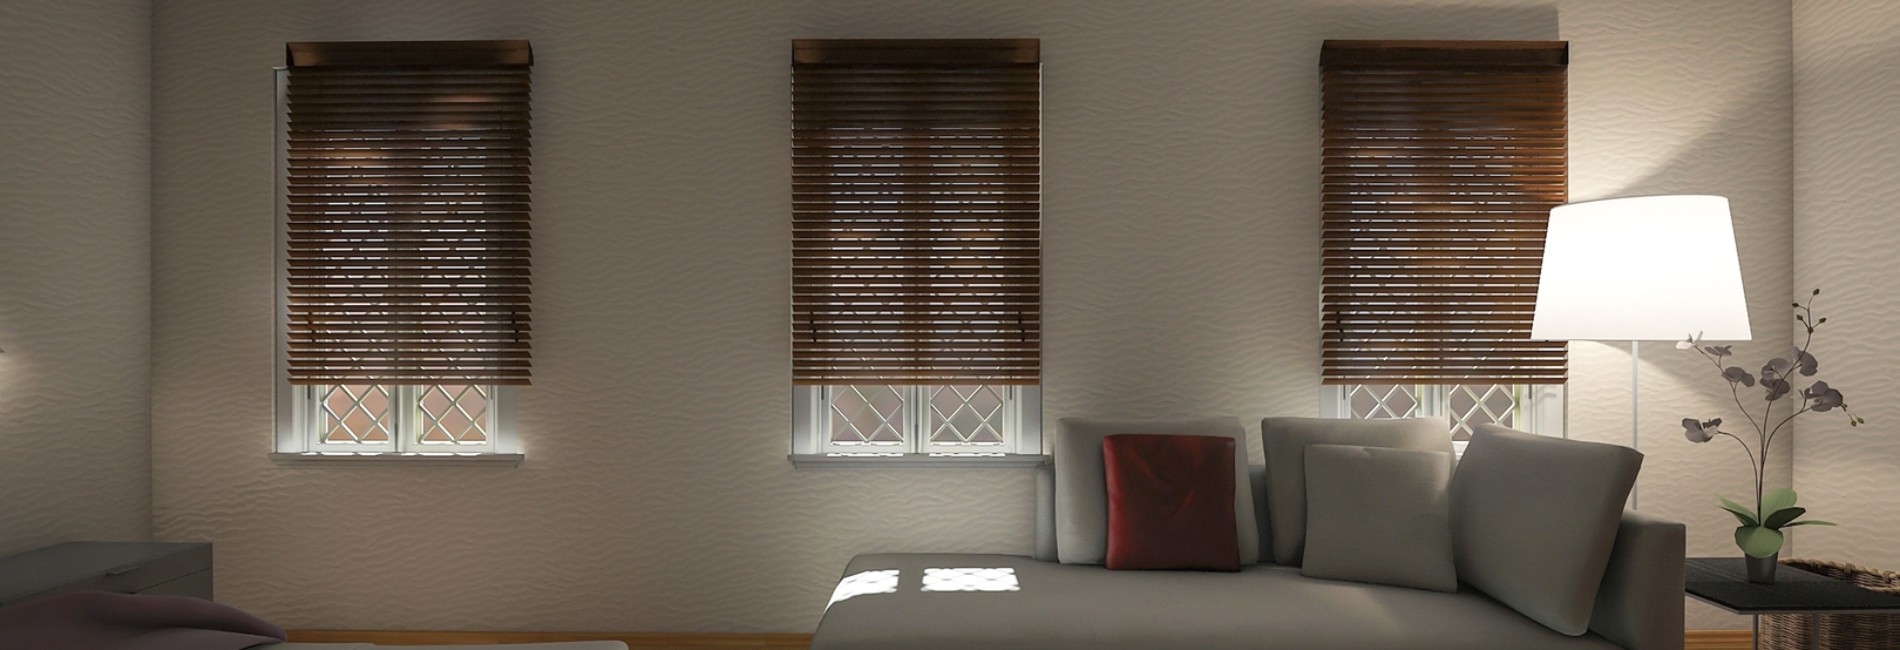 Blinds That Inspire, Curtains That Comfort